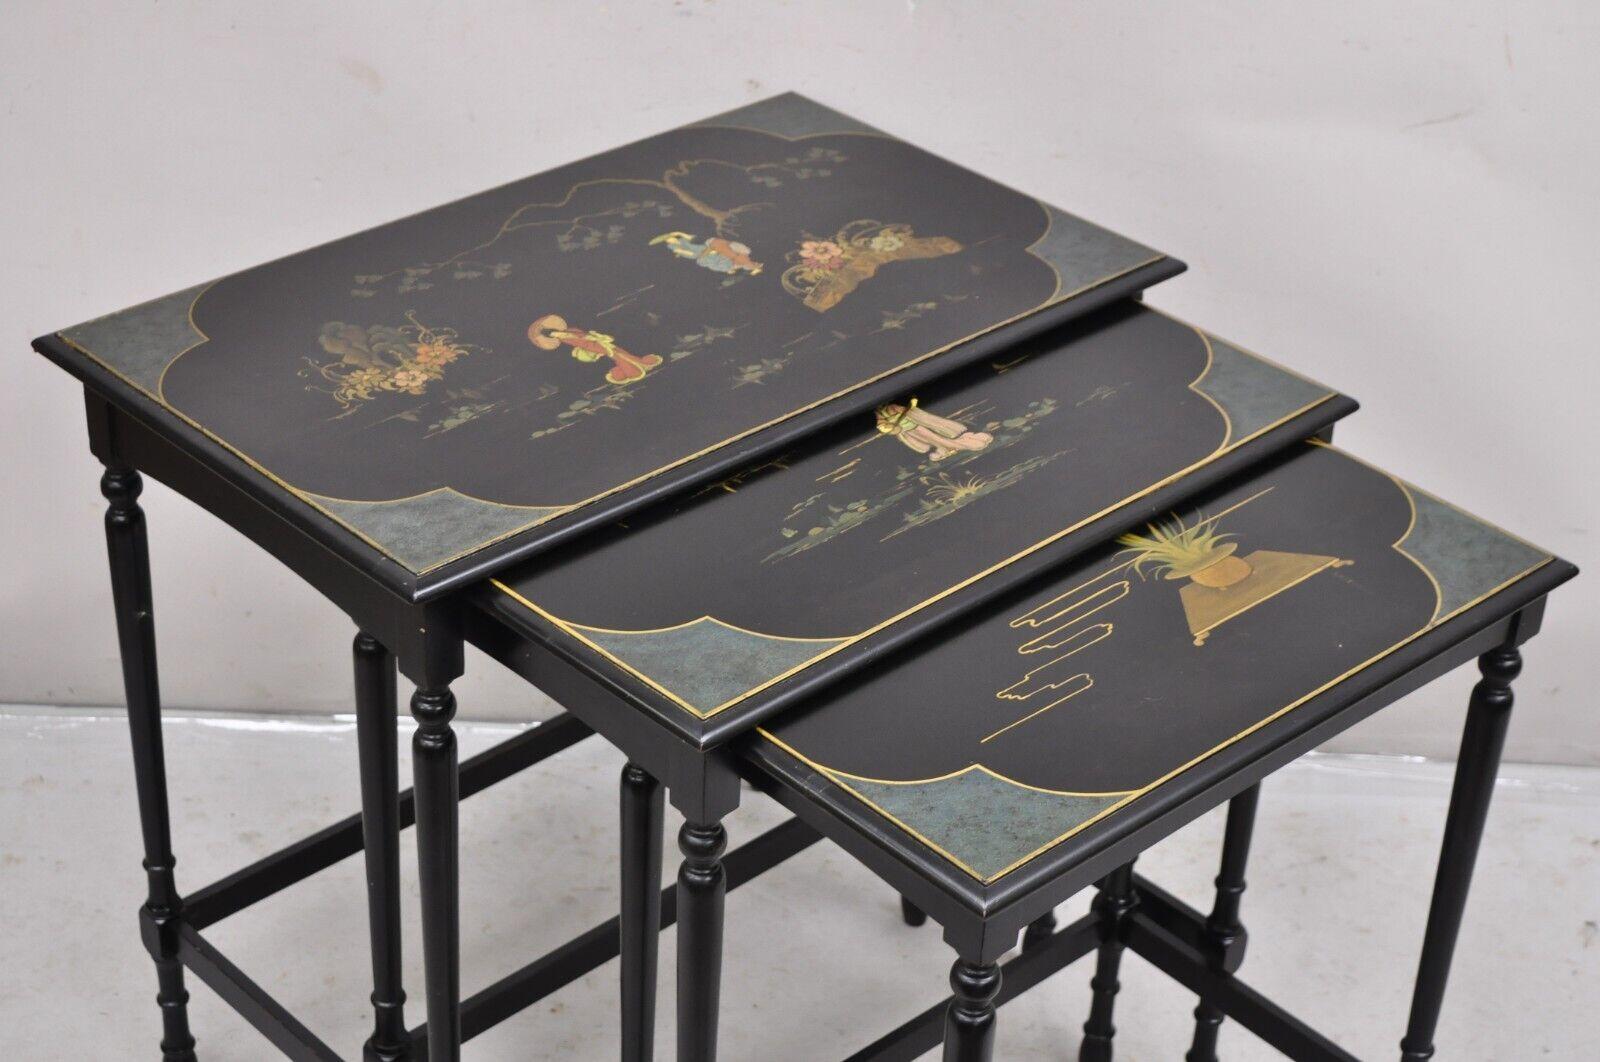 Vtg Chinoiserie Asian Inspired Black Nesting Side Tables by Paalman - Set of 3 In Good Condition For Sale In Philadelphia, PA